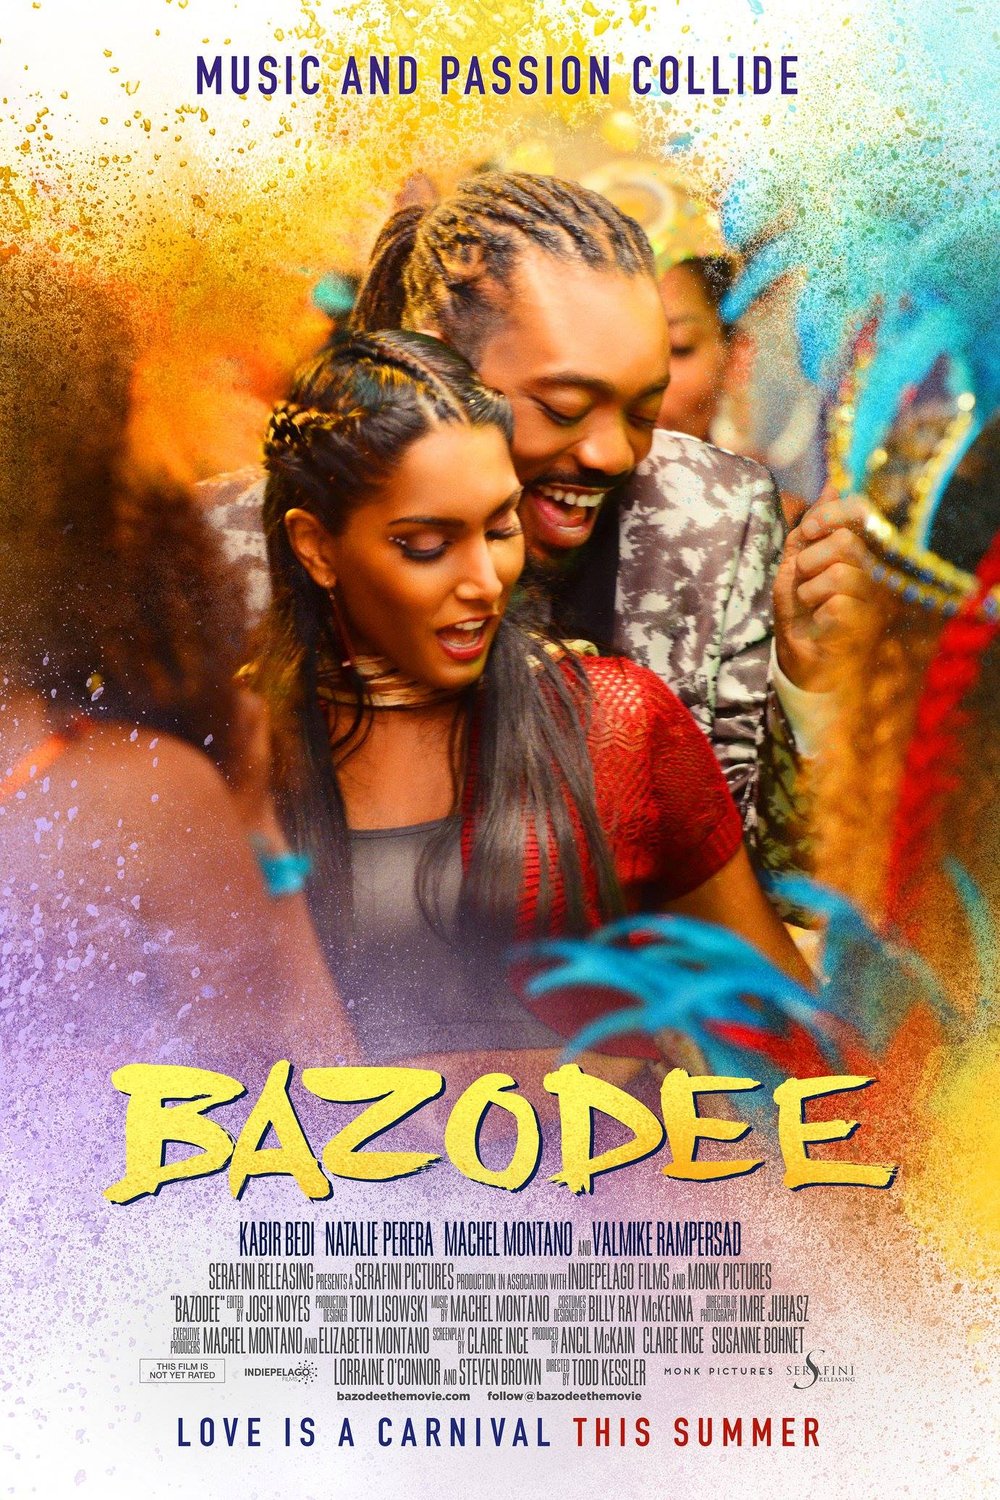 Poster of the movie Bazodee